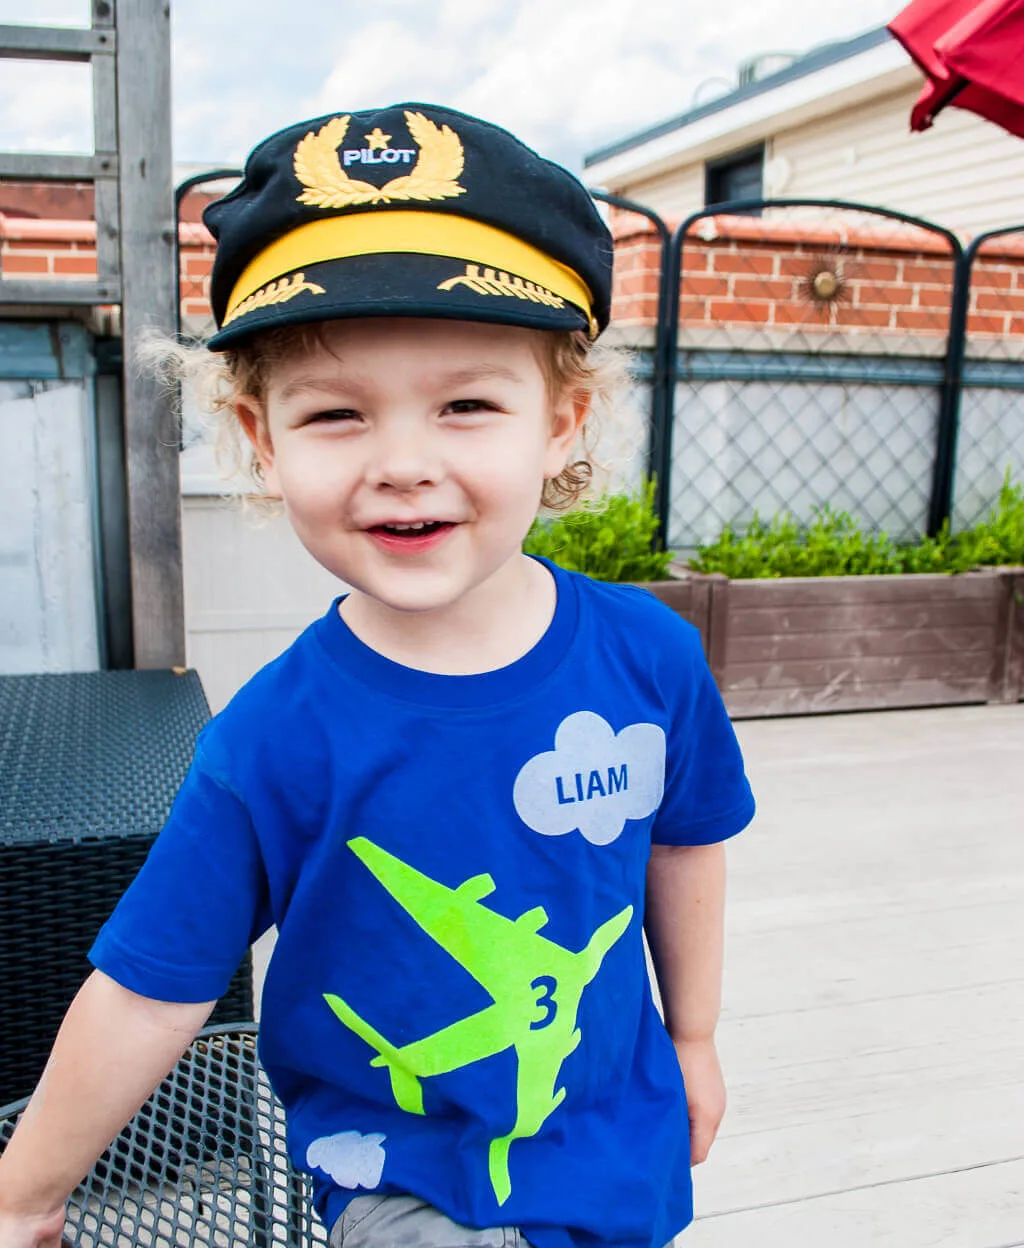 Kid's airplane birthday t-shirt personalized with name and age. Make your own iron-on airplane birthday t-shirt, or order this design online on your choice of t-shirt. Great for a modern airplane birthday party! #airplanebirthday #birthday #t-shirt #birthdayparty #kids